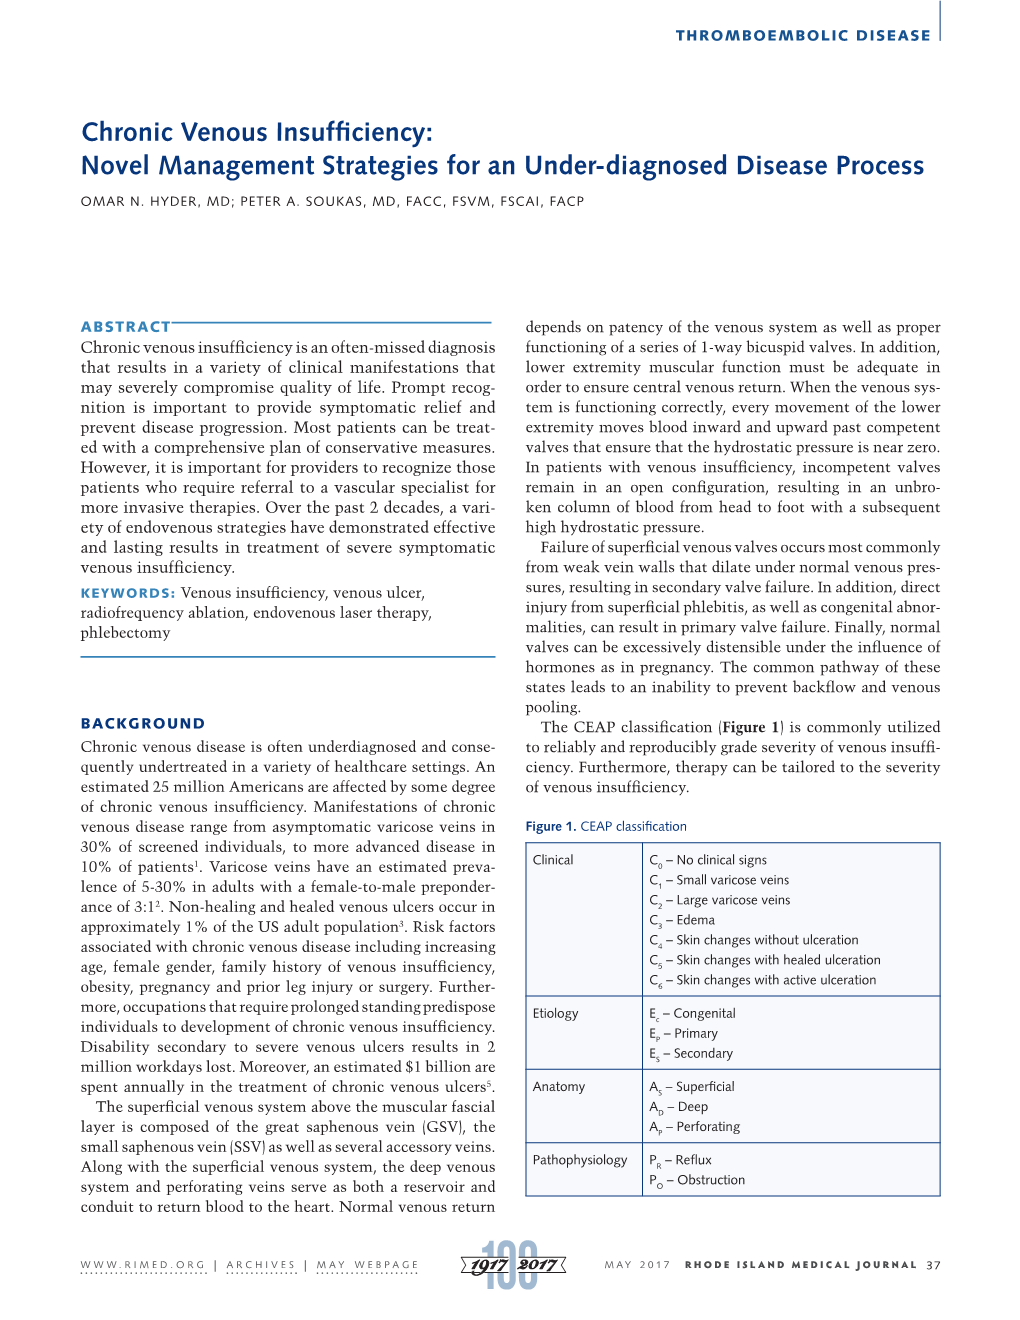 Chronic Venous Insufficiency: Novel Management Strategies for an Under-Diagnosed Disease Process